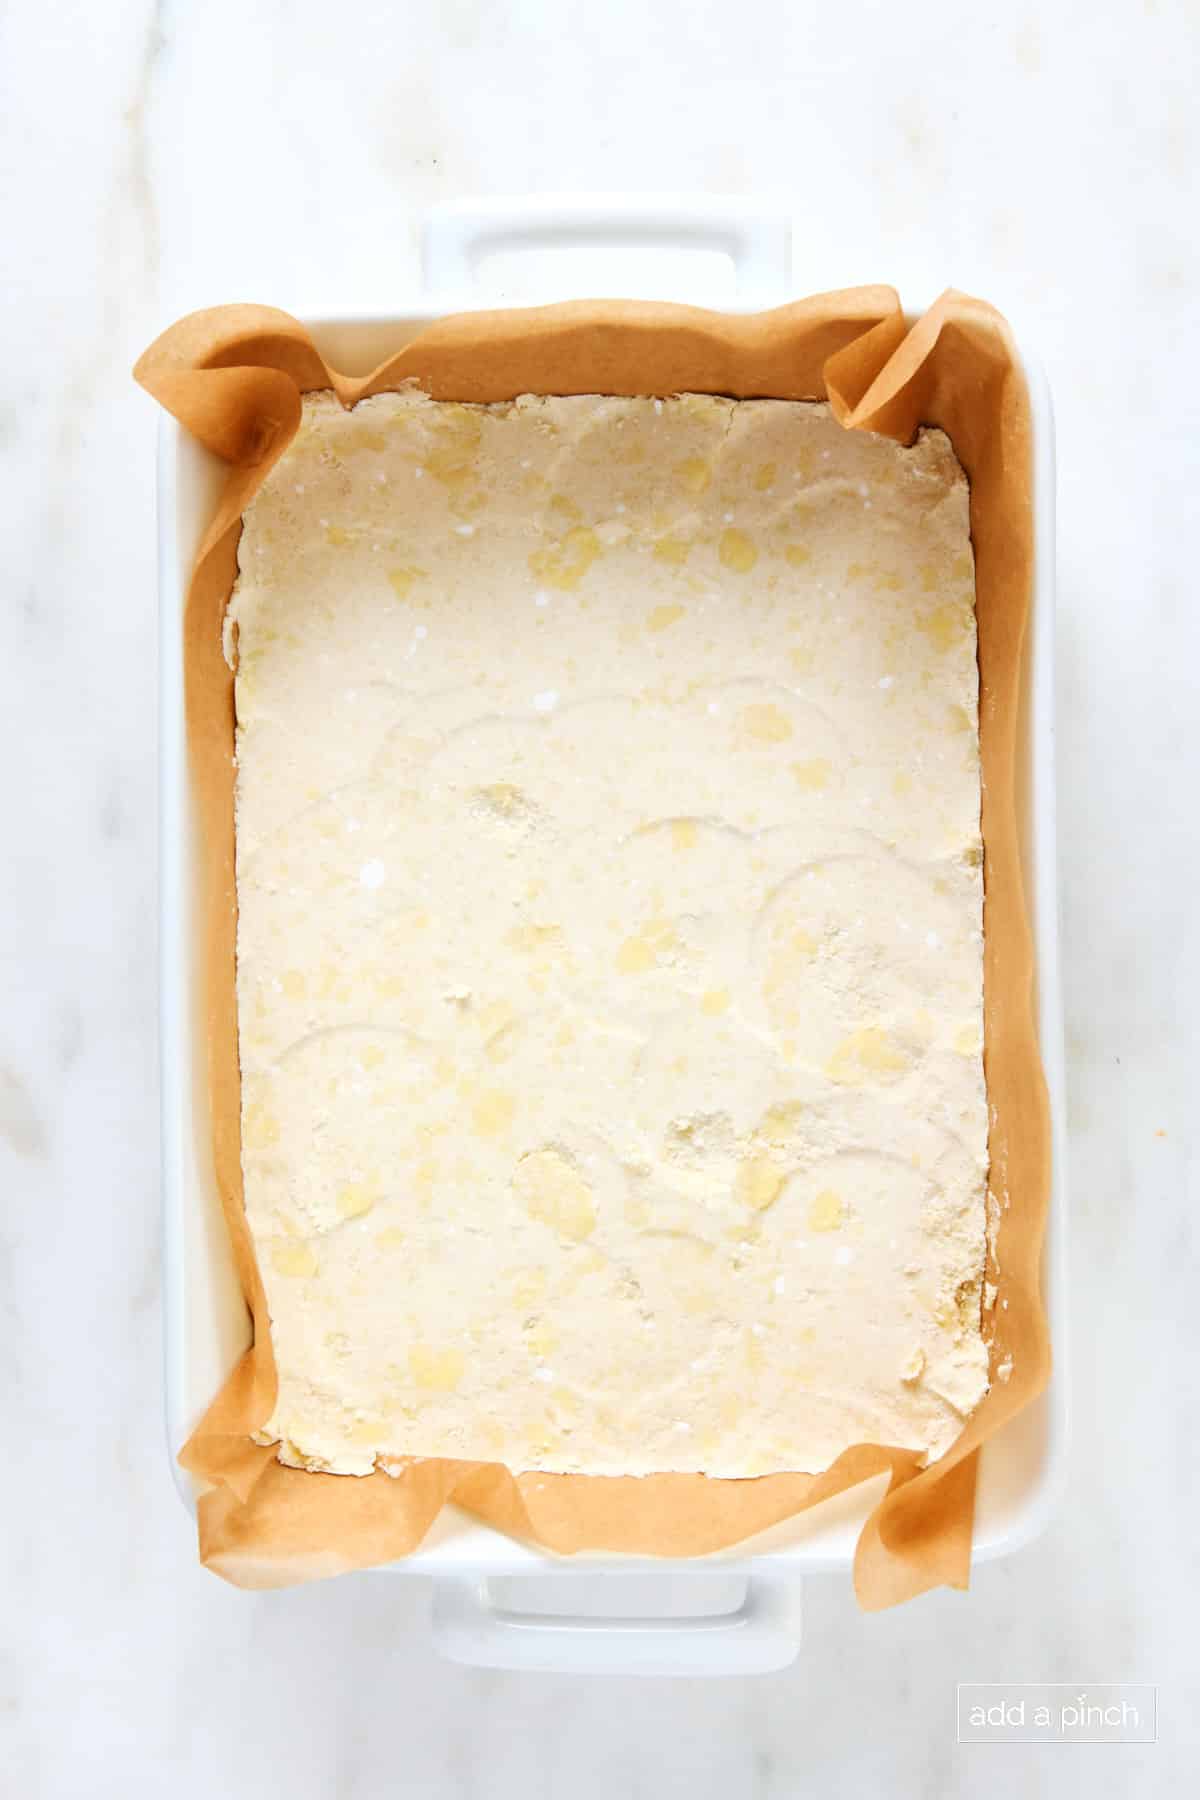 Shortbread crust in a parchment-lined baking dish.